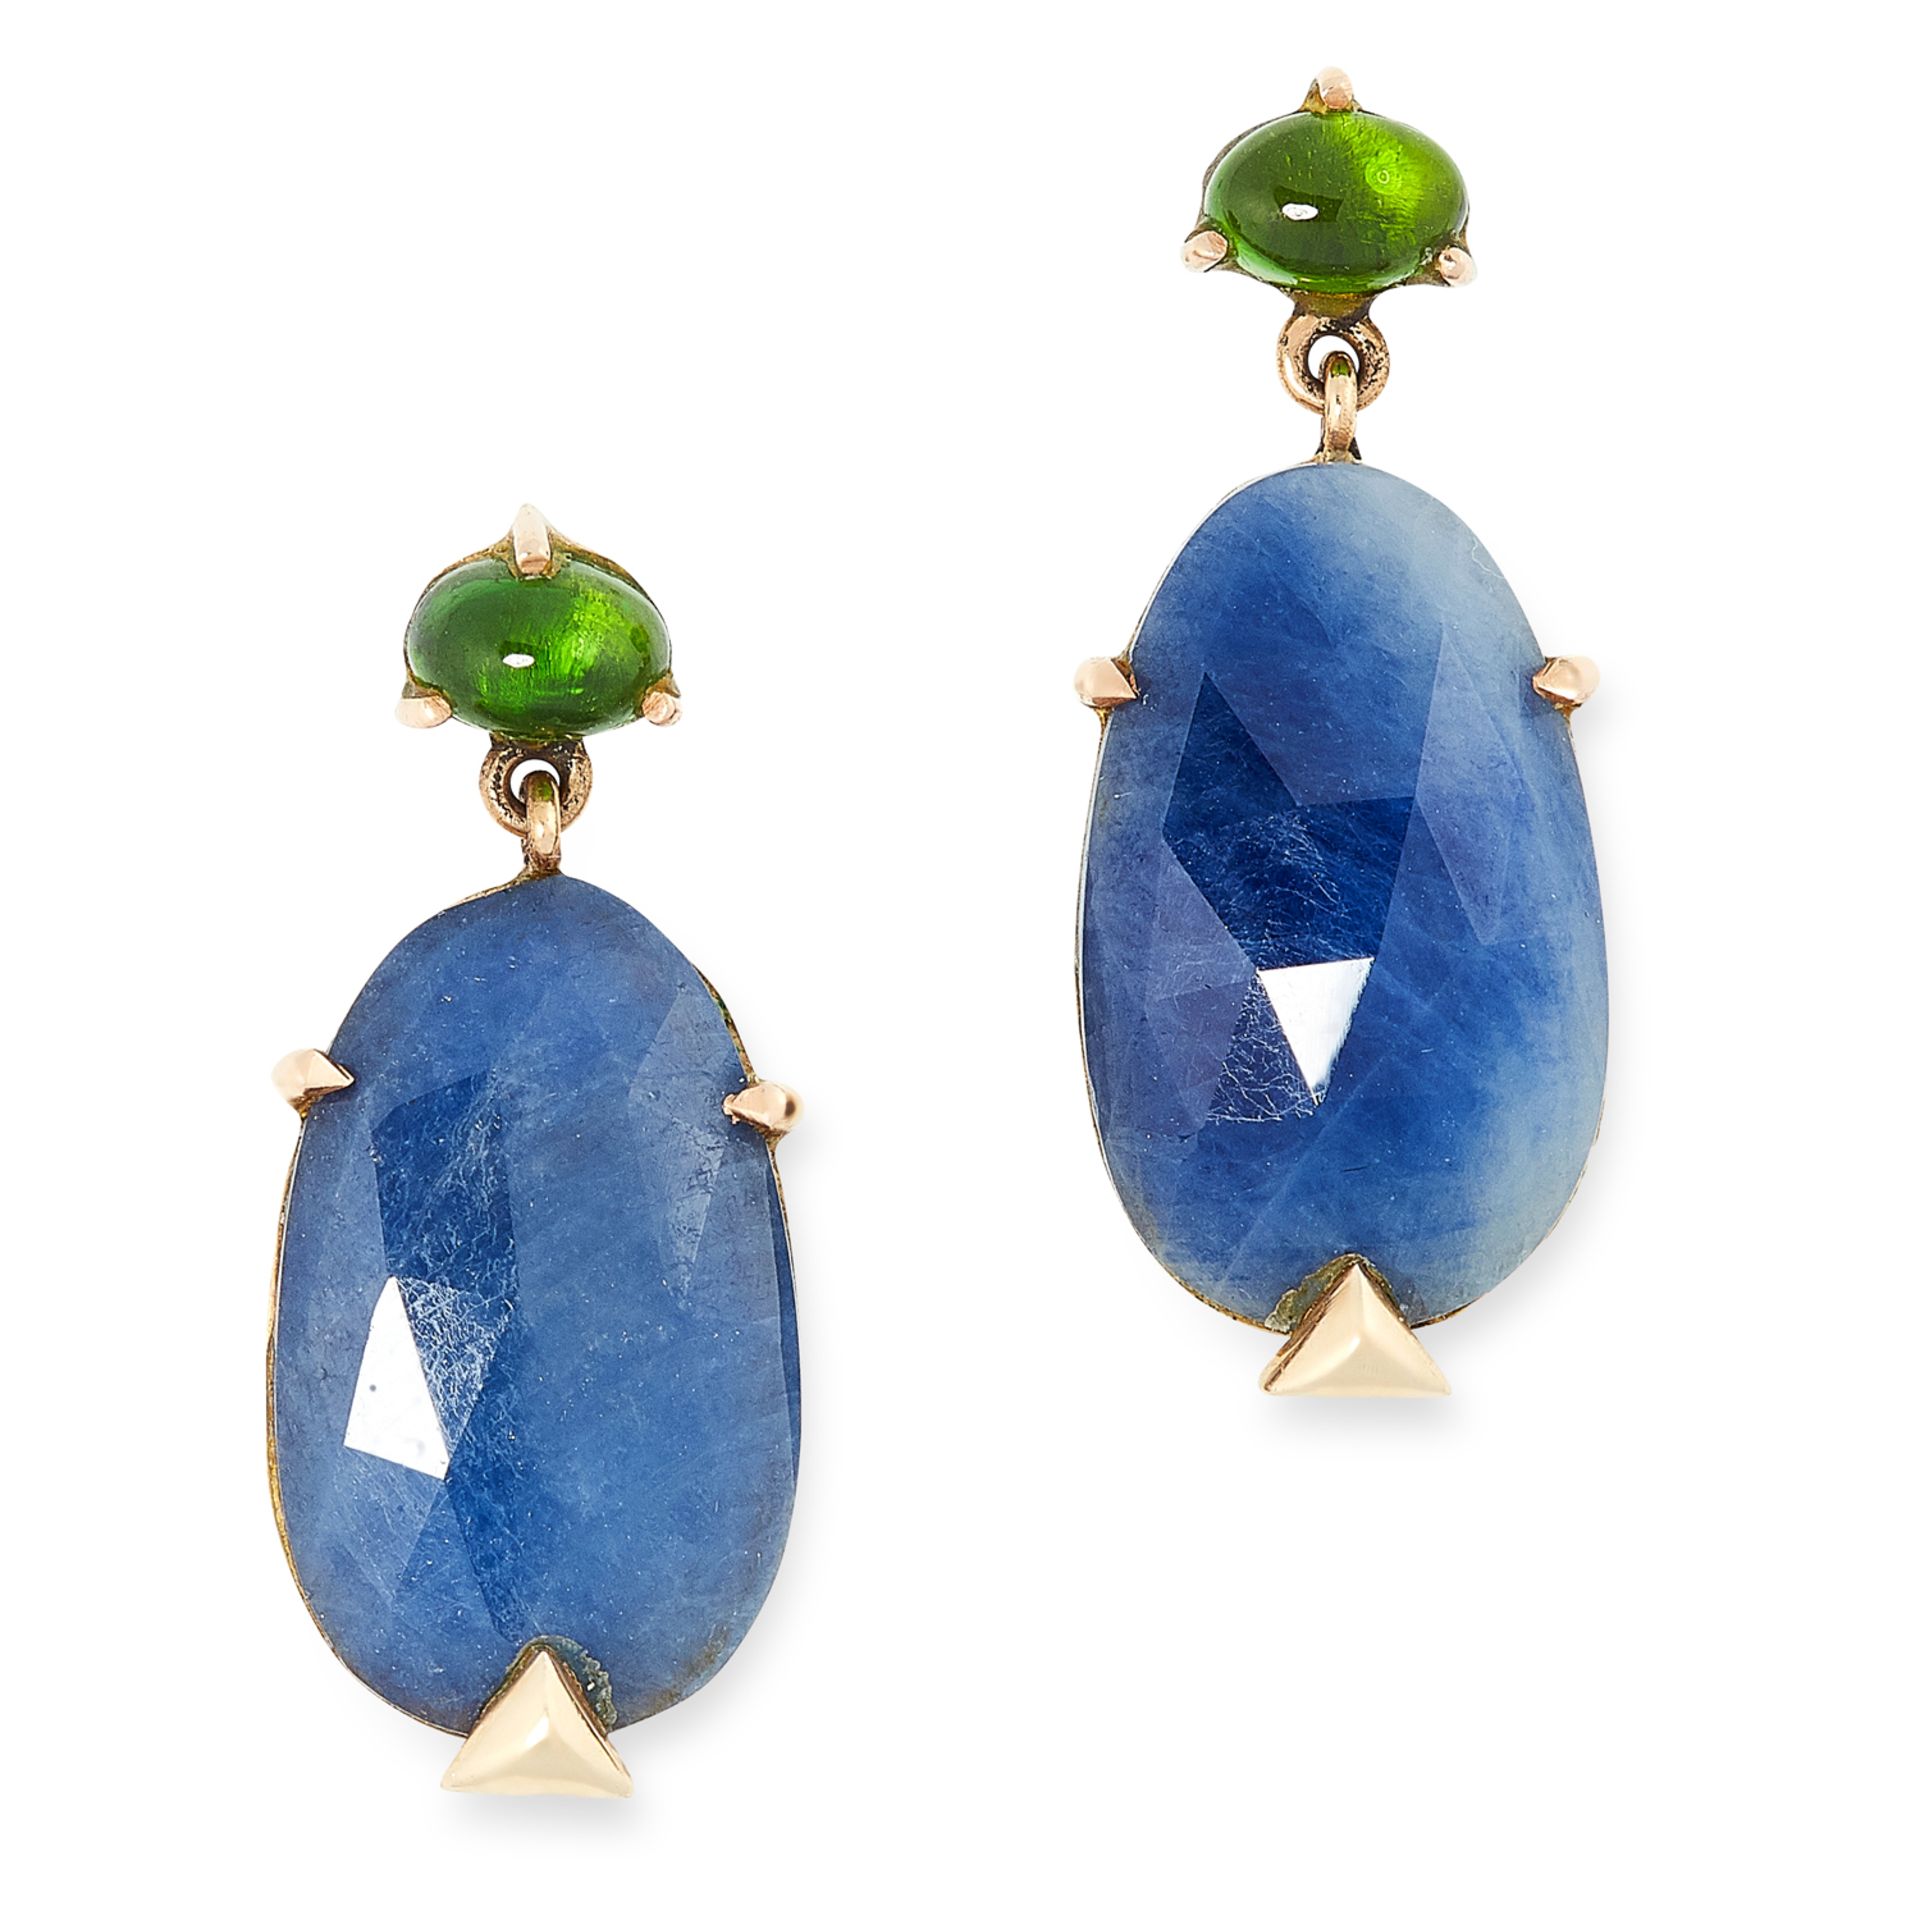 A PAIR OF TOURMALINE AND SAPPHIRE EARRINGS in yellow gold, each set with a cabochon green tourmaline